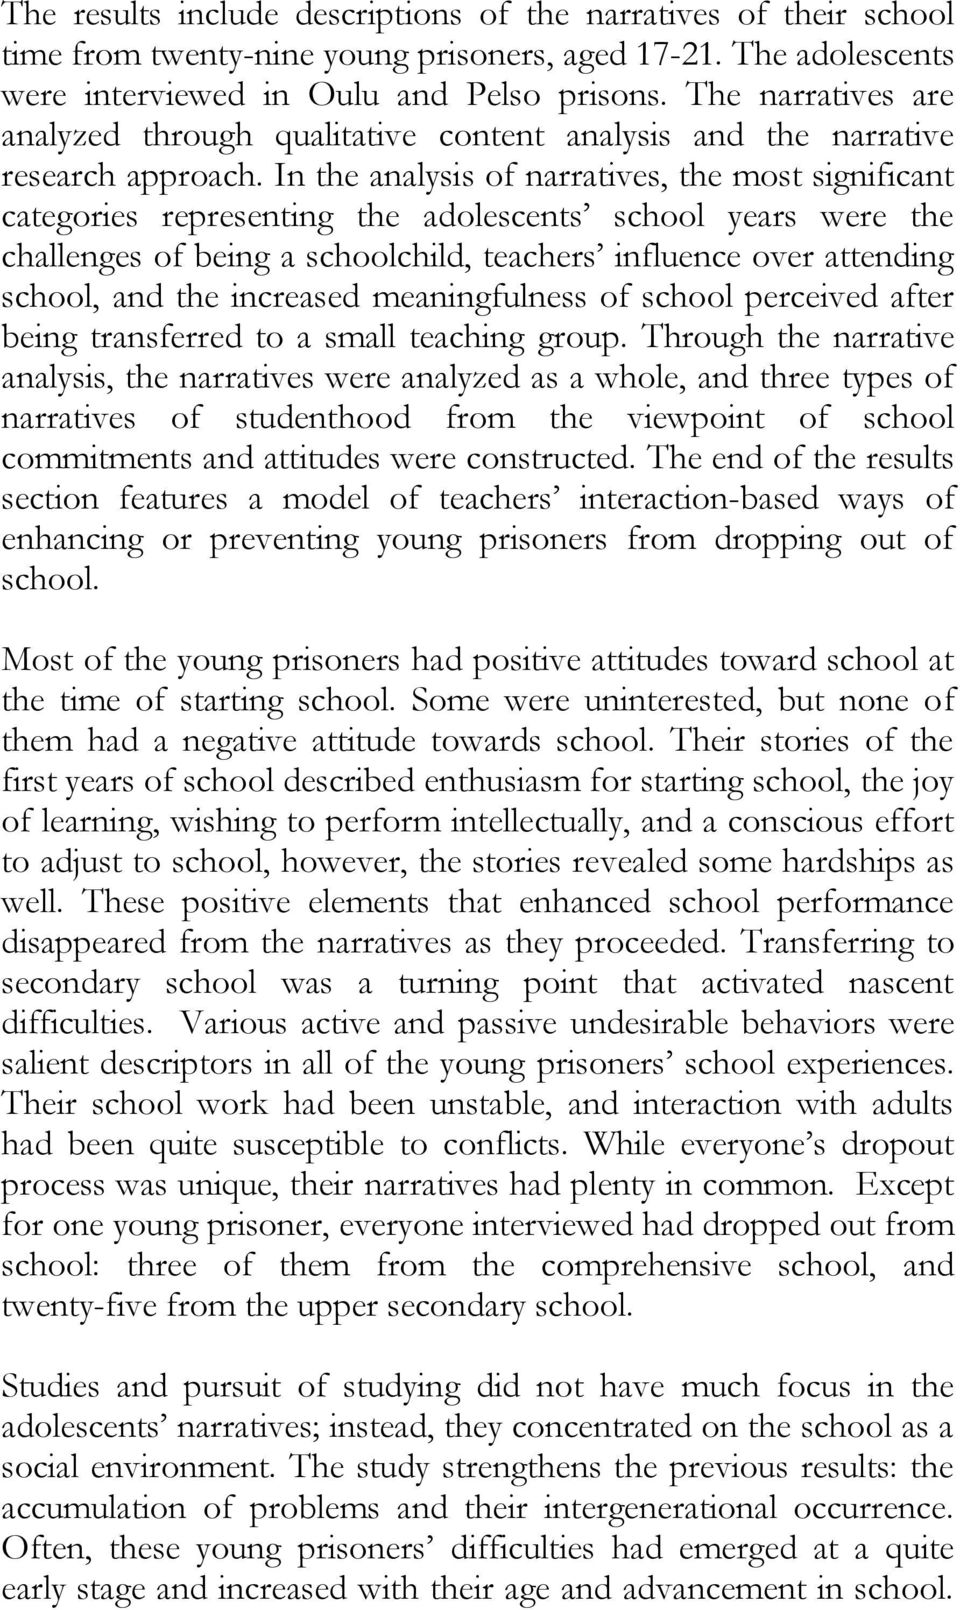 In the analysis of narratives, the most significant categories representing the adolescents school years were the challenges of being a schoolchild, teachers influence over attending school, and the